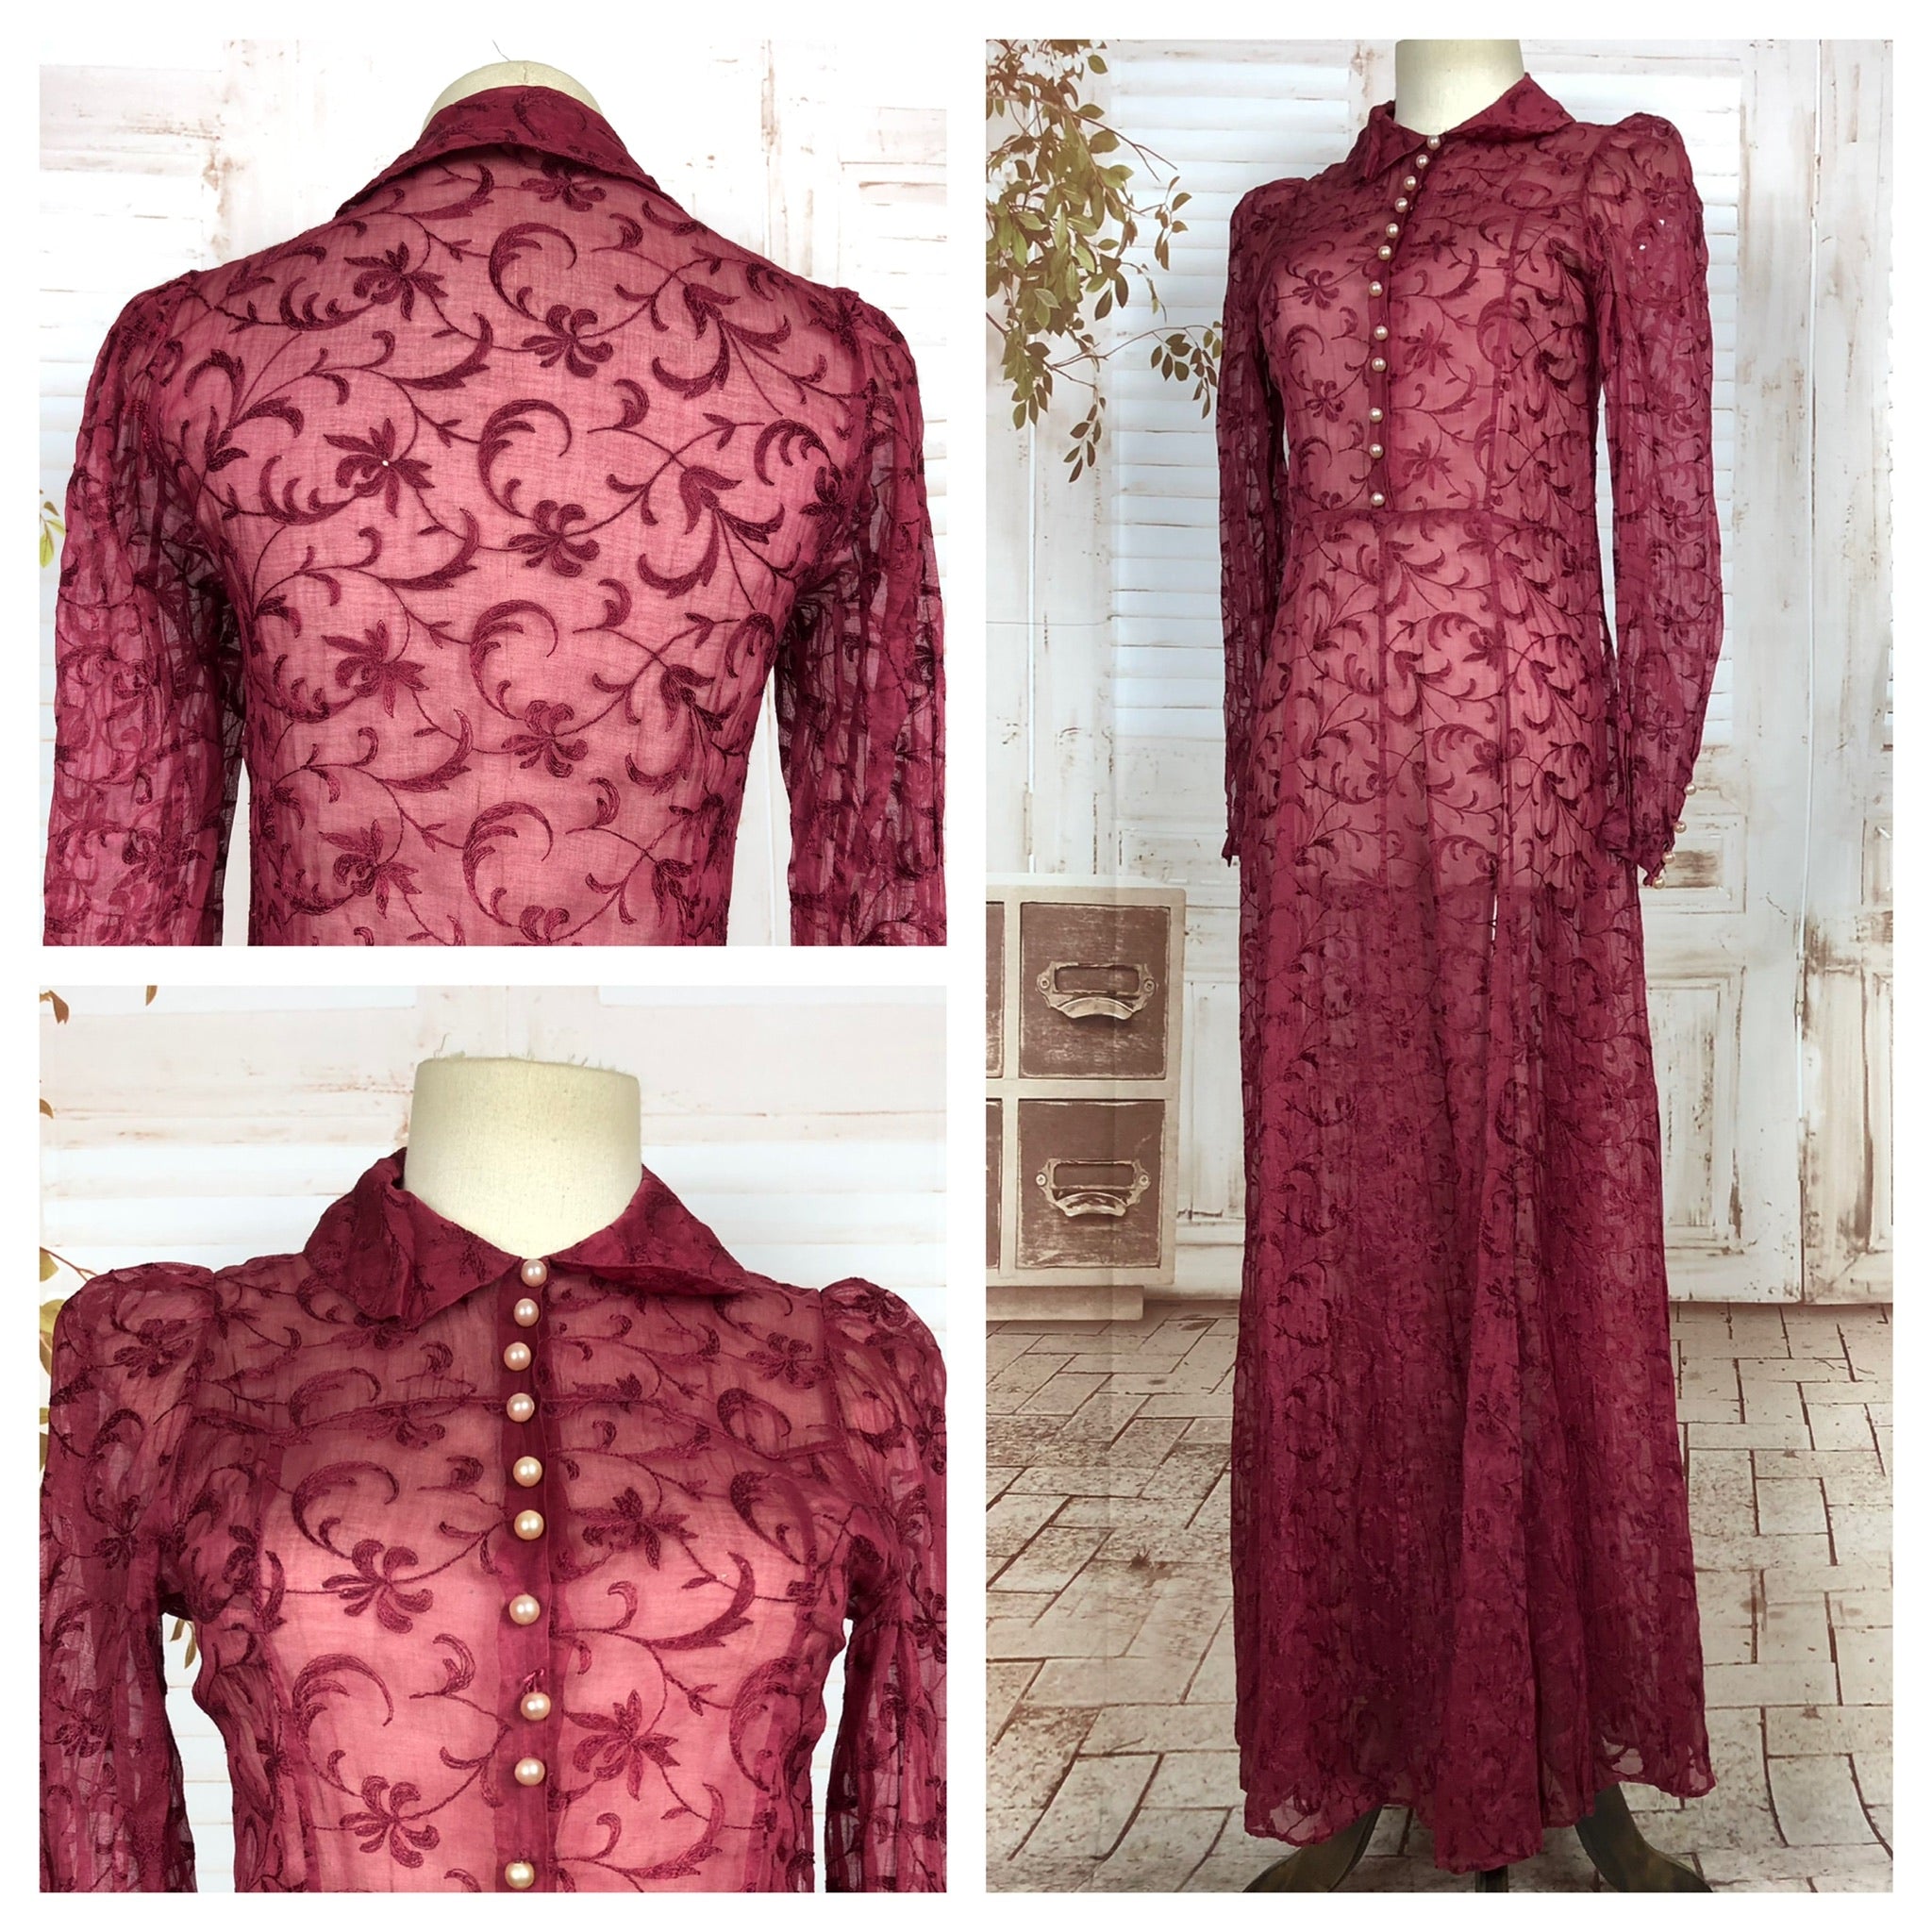 Stunning Original 1930s Vintage Burgundy Embroidered Full Length Dress With Puff Sleeves